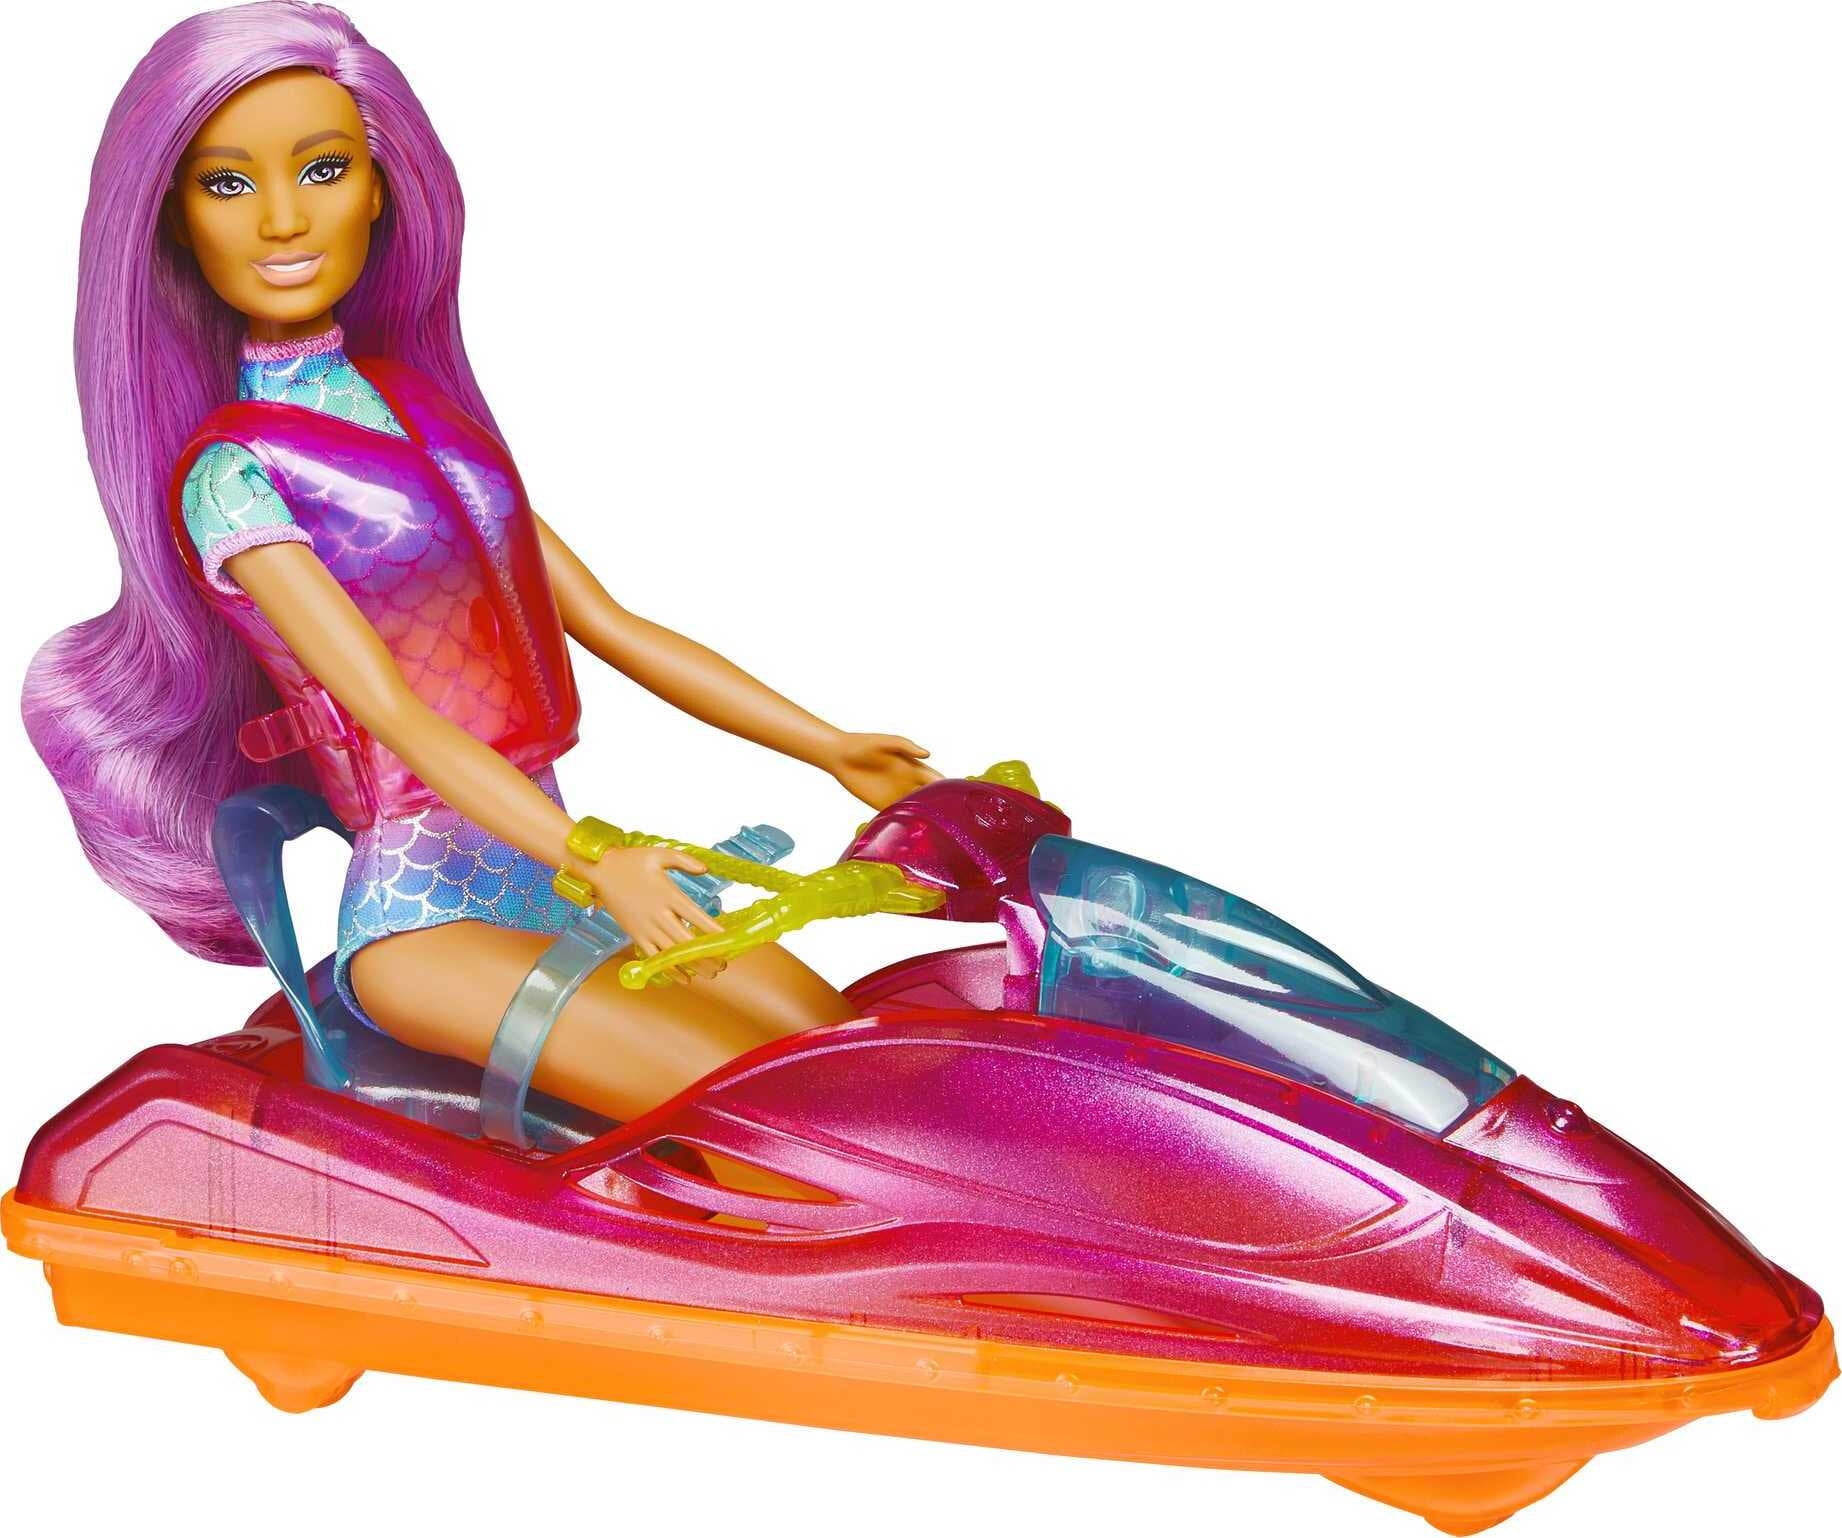 Barbie Beach Doll with Jet Ski and Water Sport Accessories, Puppy, Dolphins and More